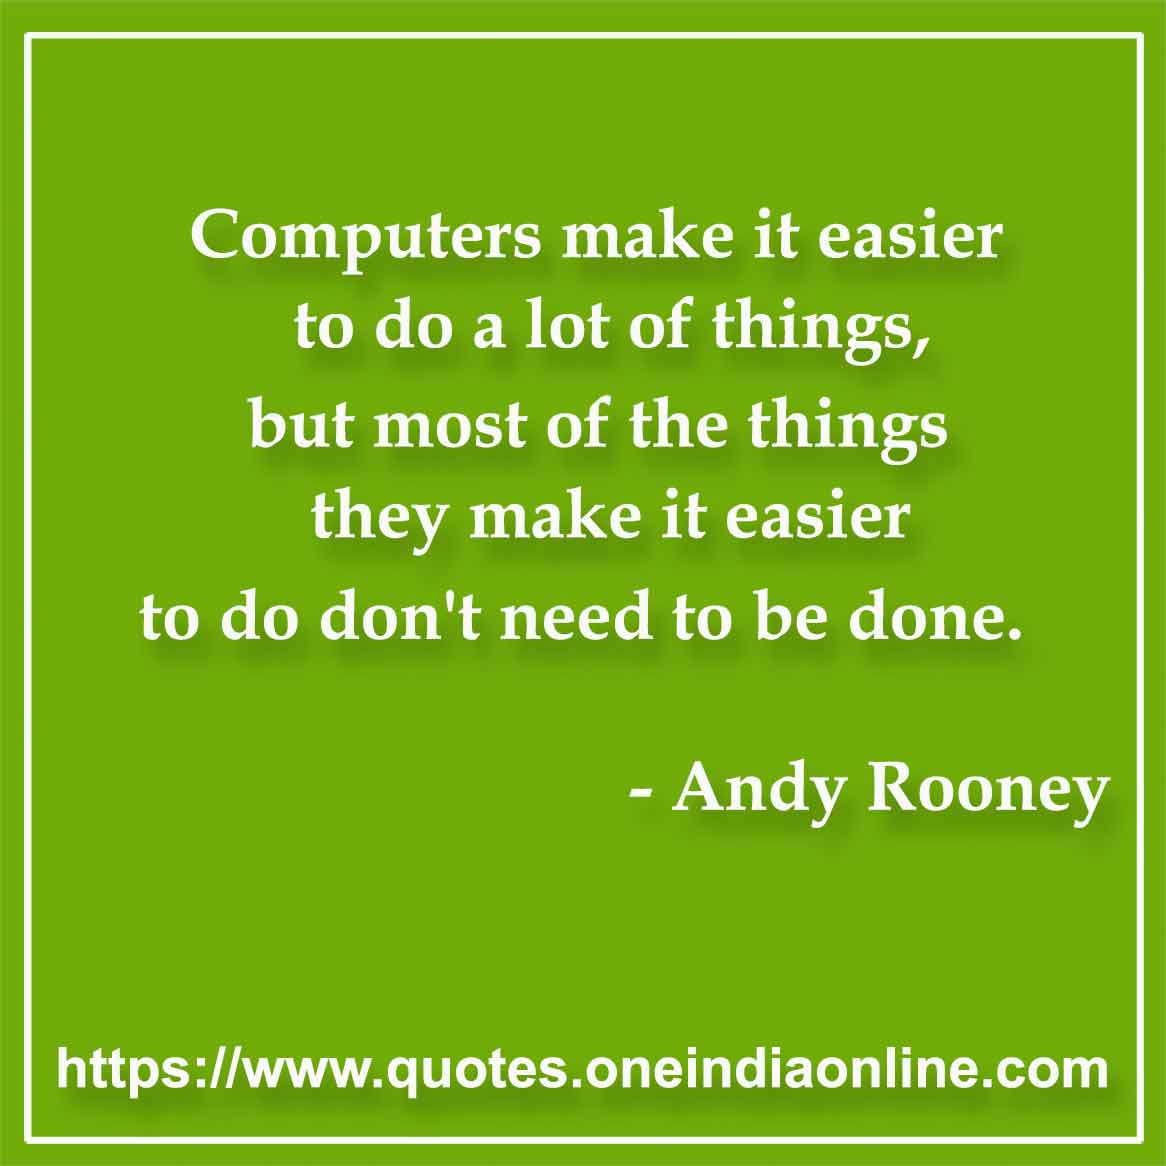 Computers make it easier to do a lot of things, but most of the things they make it easier to do don't need to be done.

- Computer Quotes by Andy Rooney